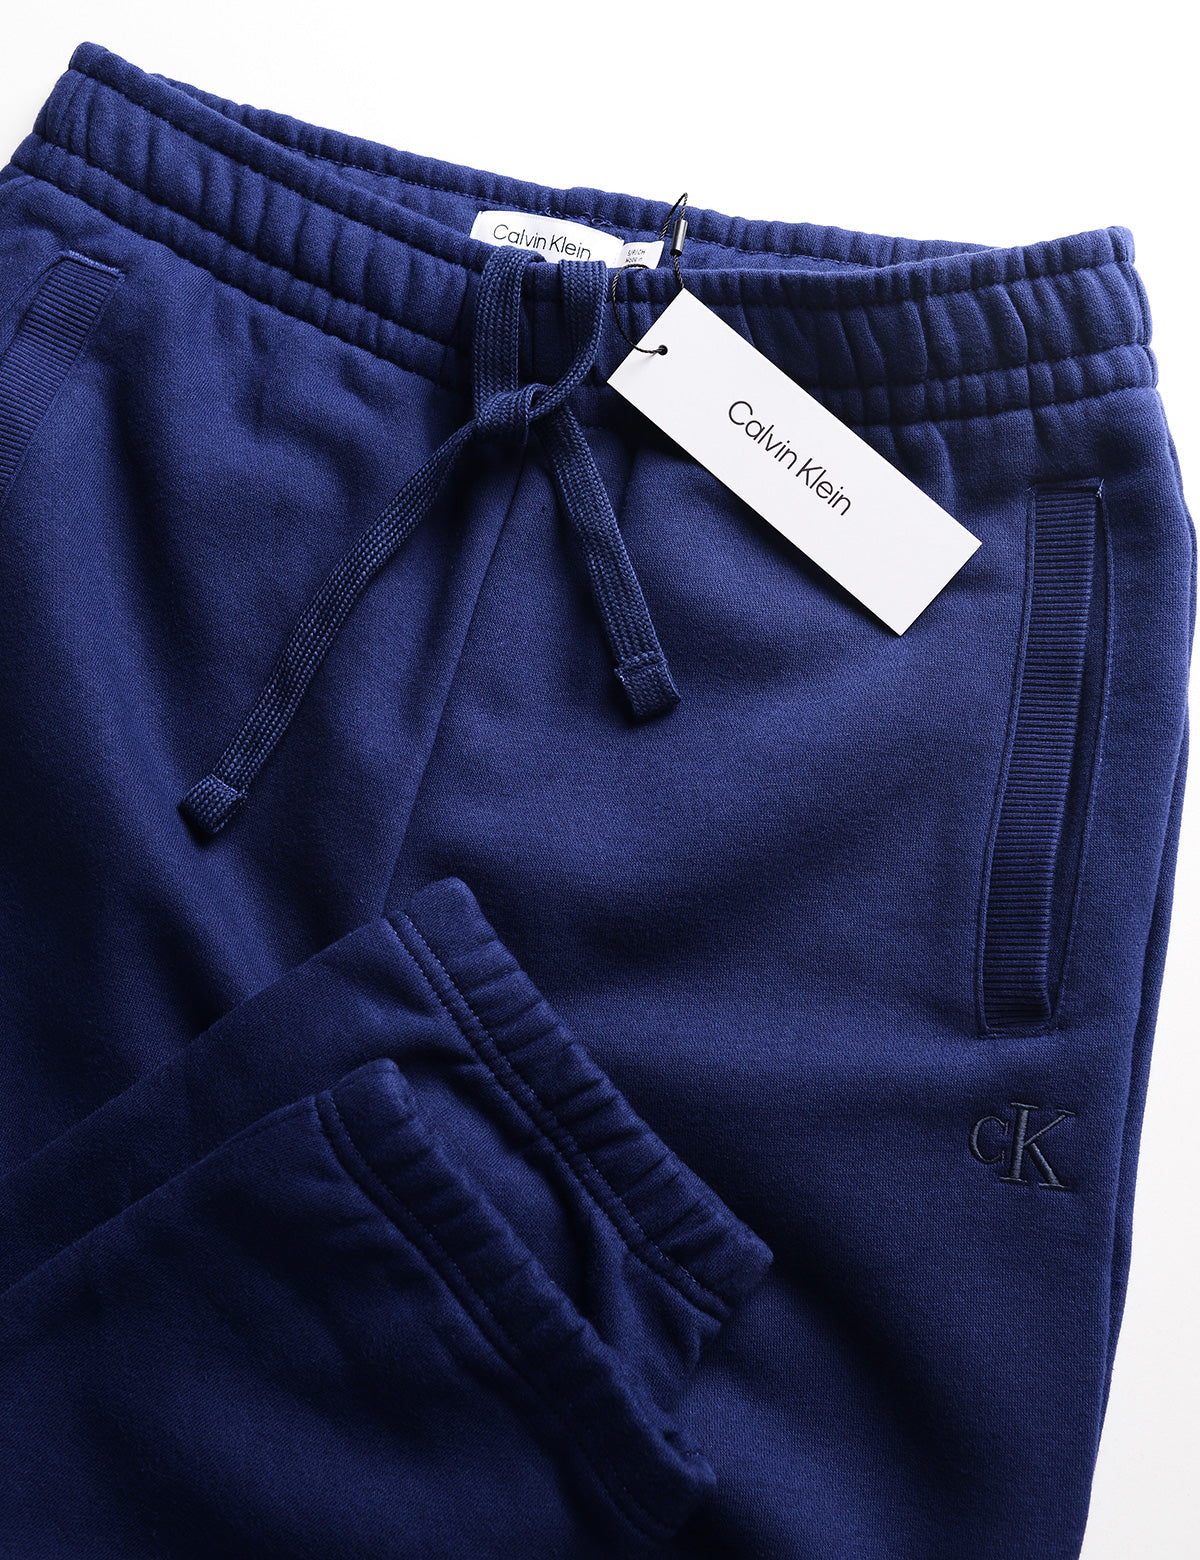 Detail of the waist, pocket, and cuff of the Calvin Klein Archive Logo Fleece Jogger - Beacon Blue